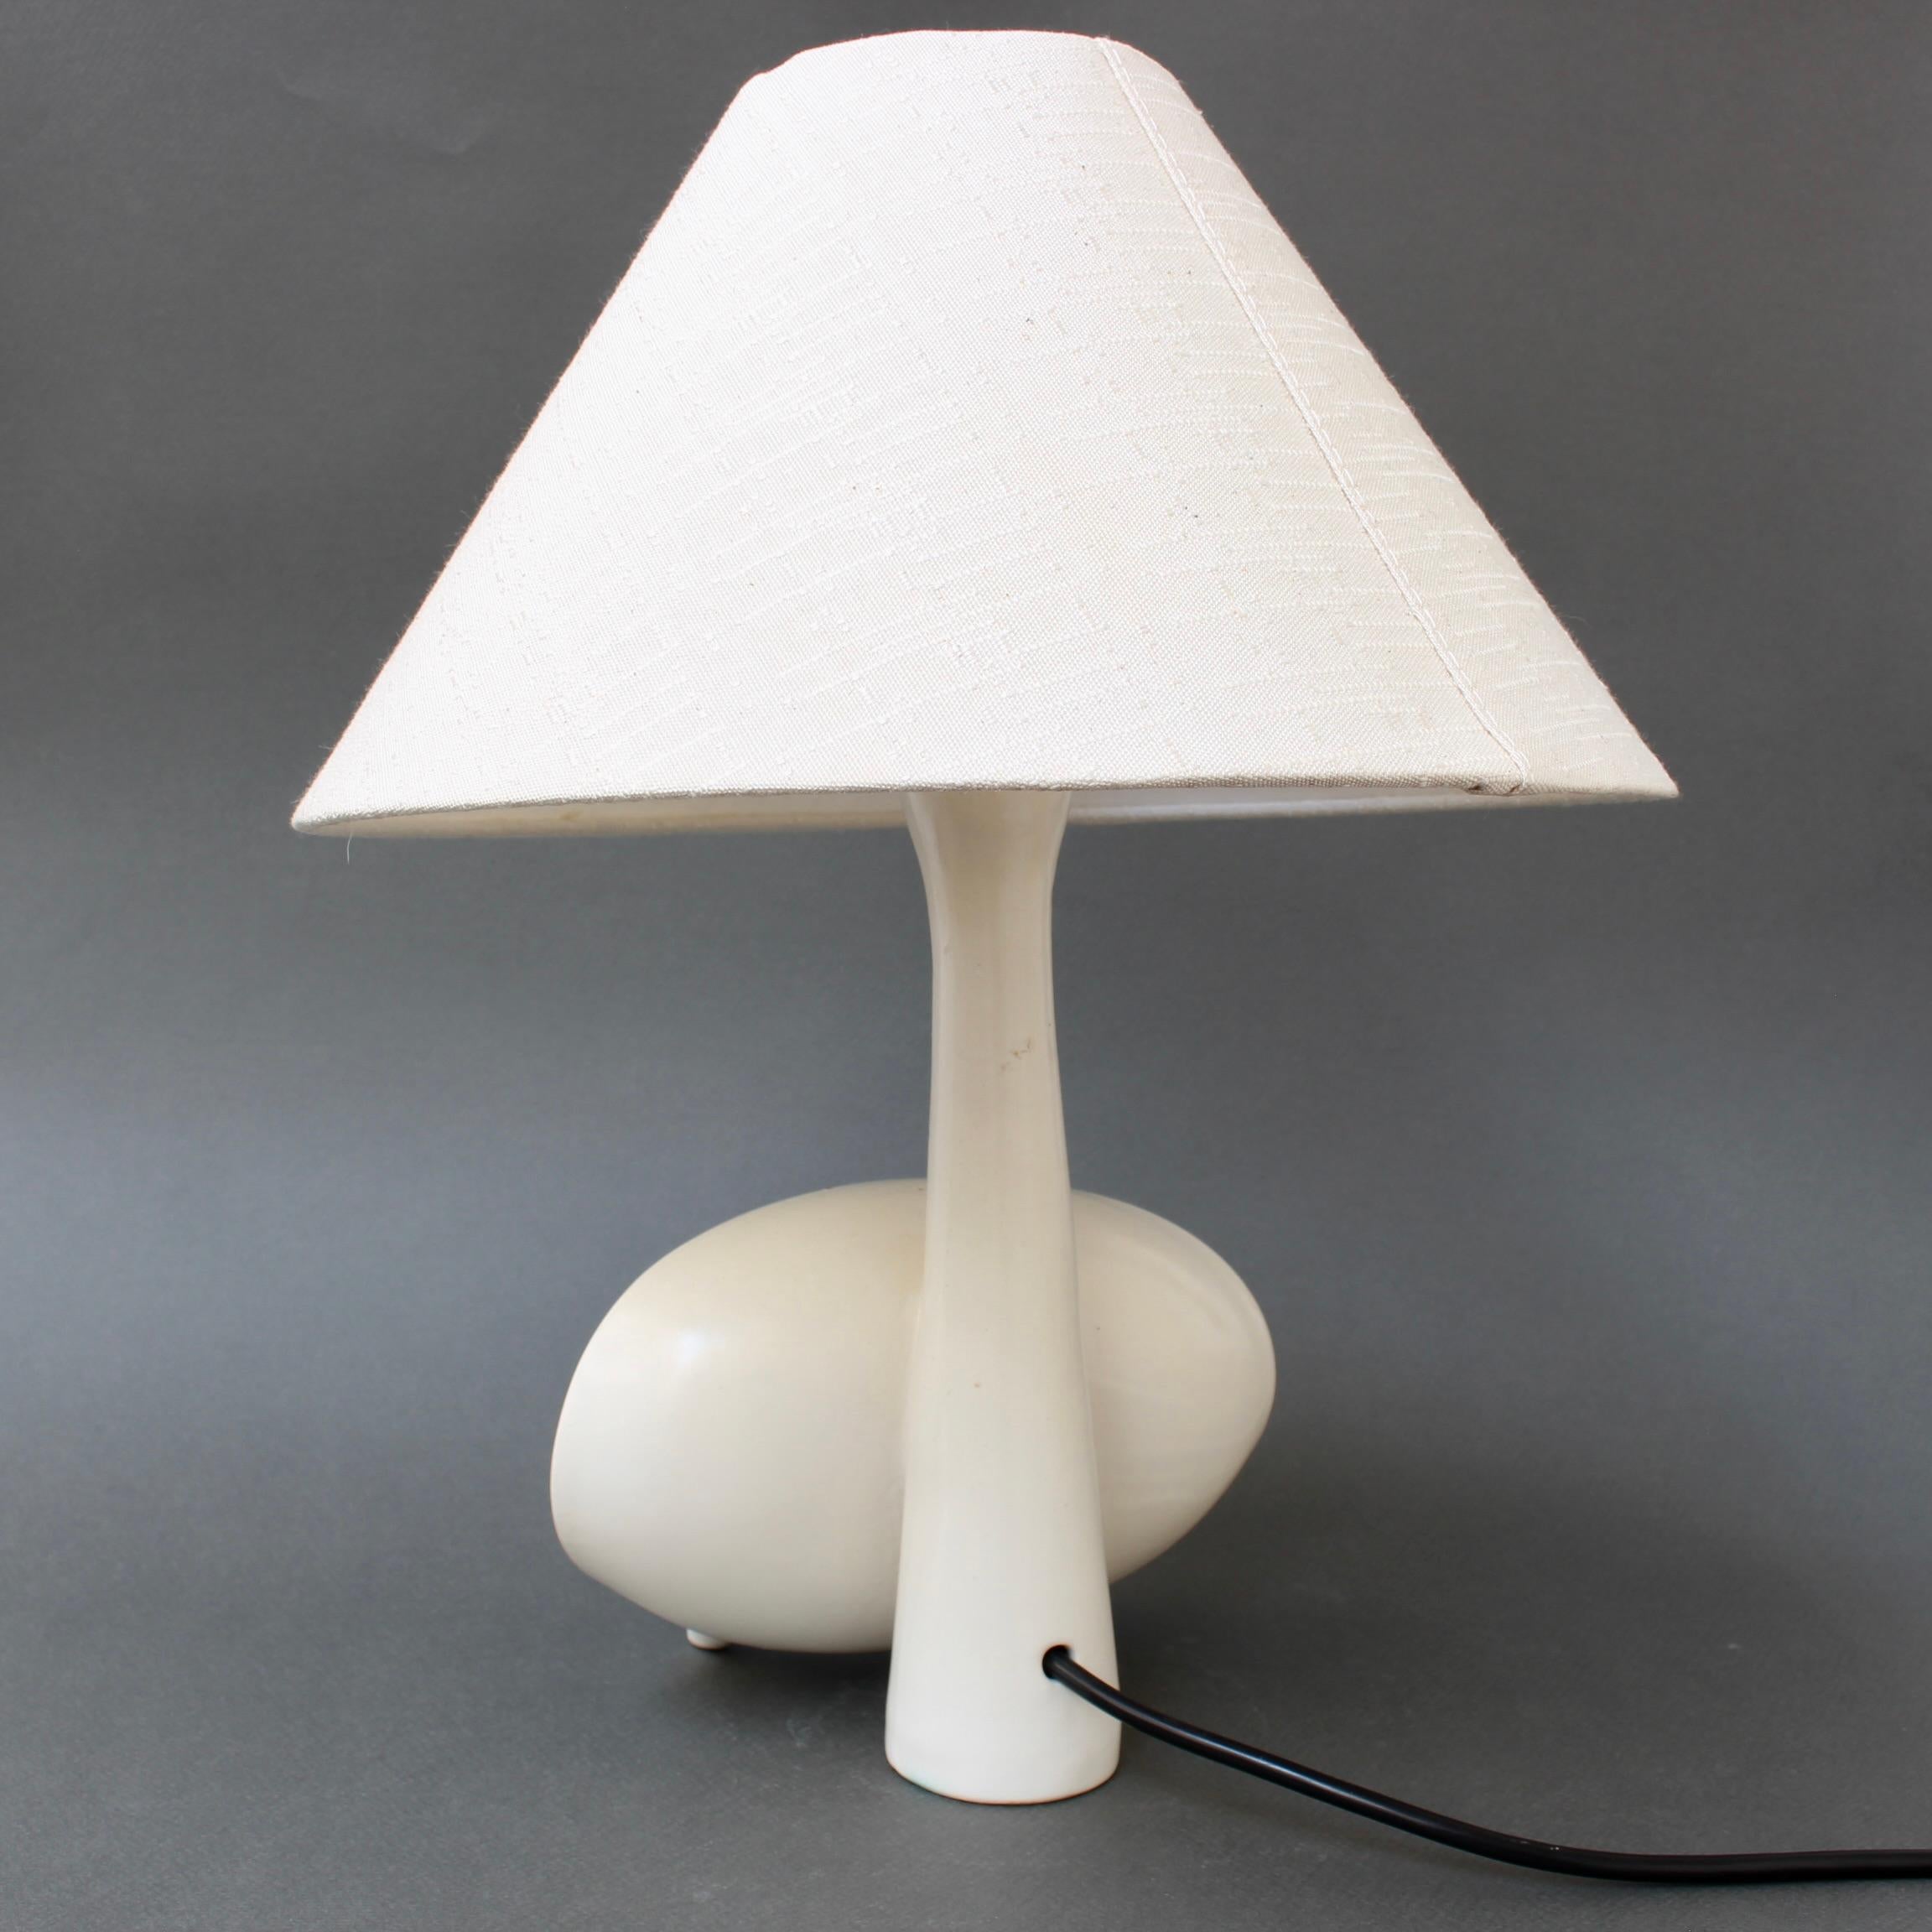 French Vintage Ceramic Table Lamp by Roger Capron, 'circa 1950s' For Sale 5